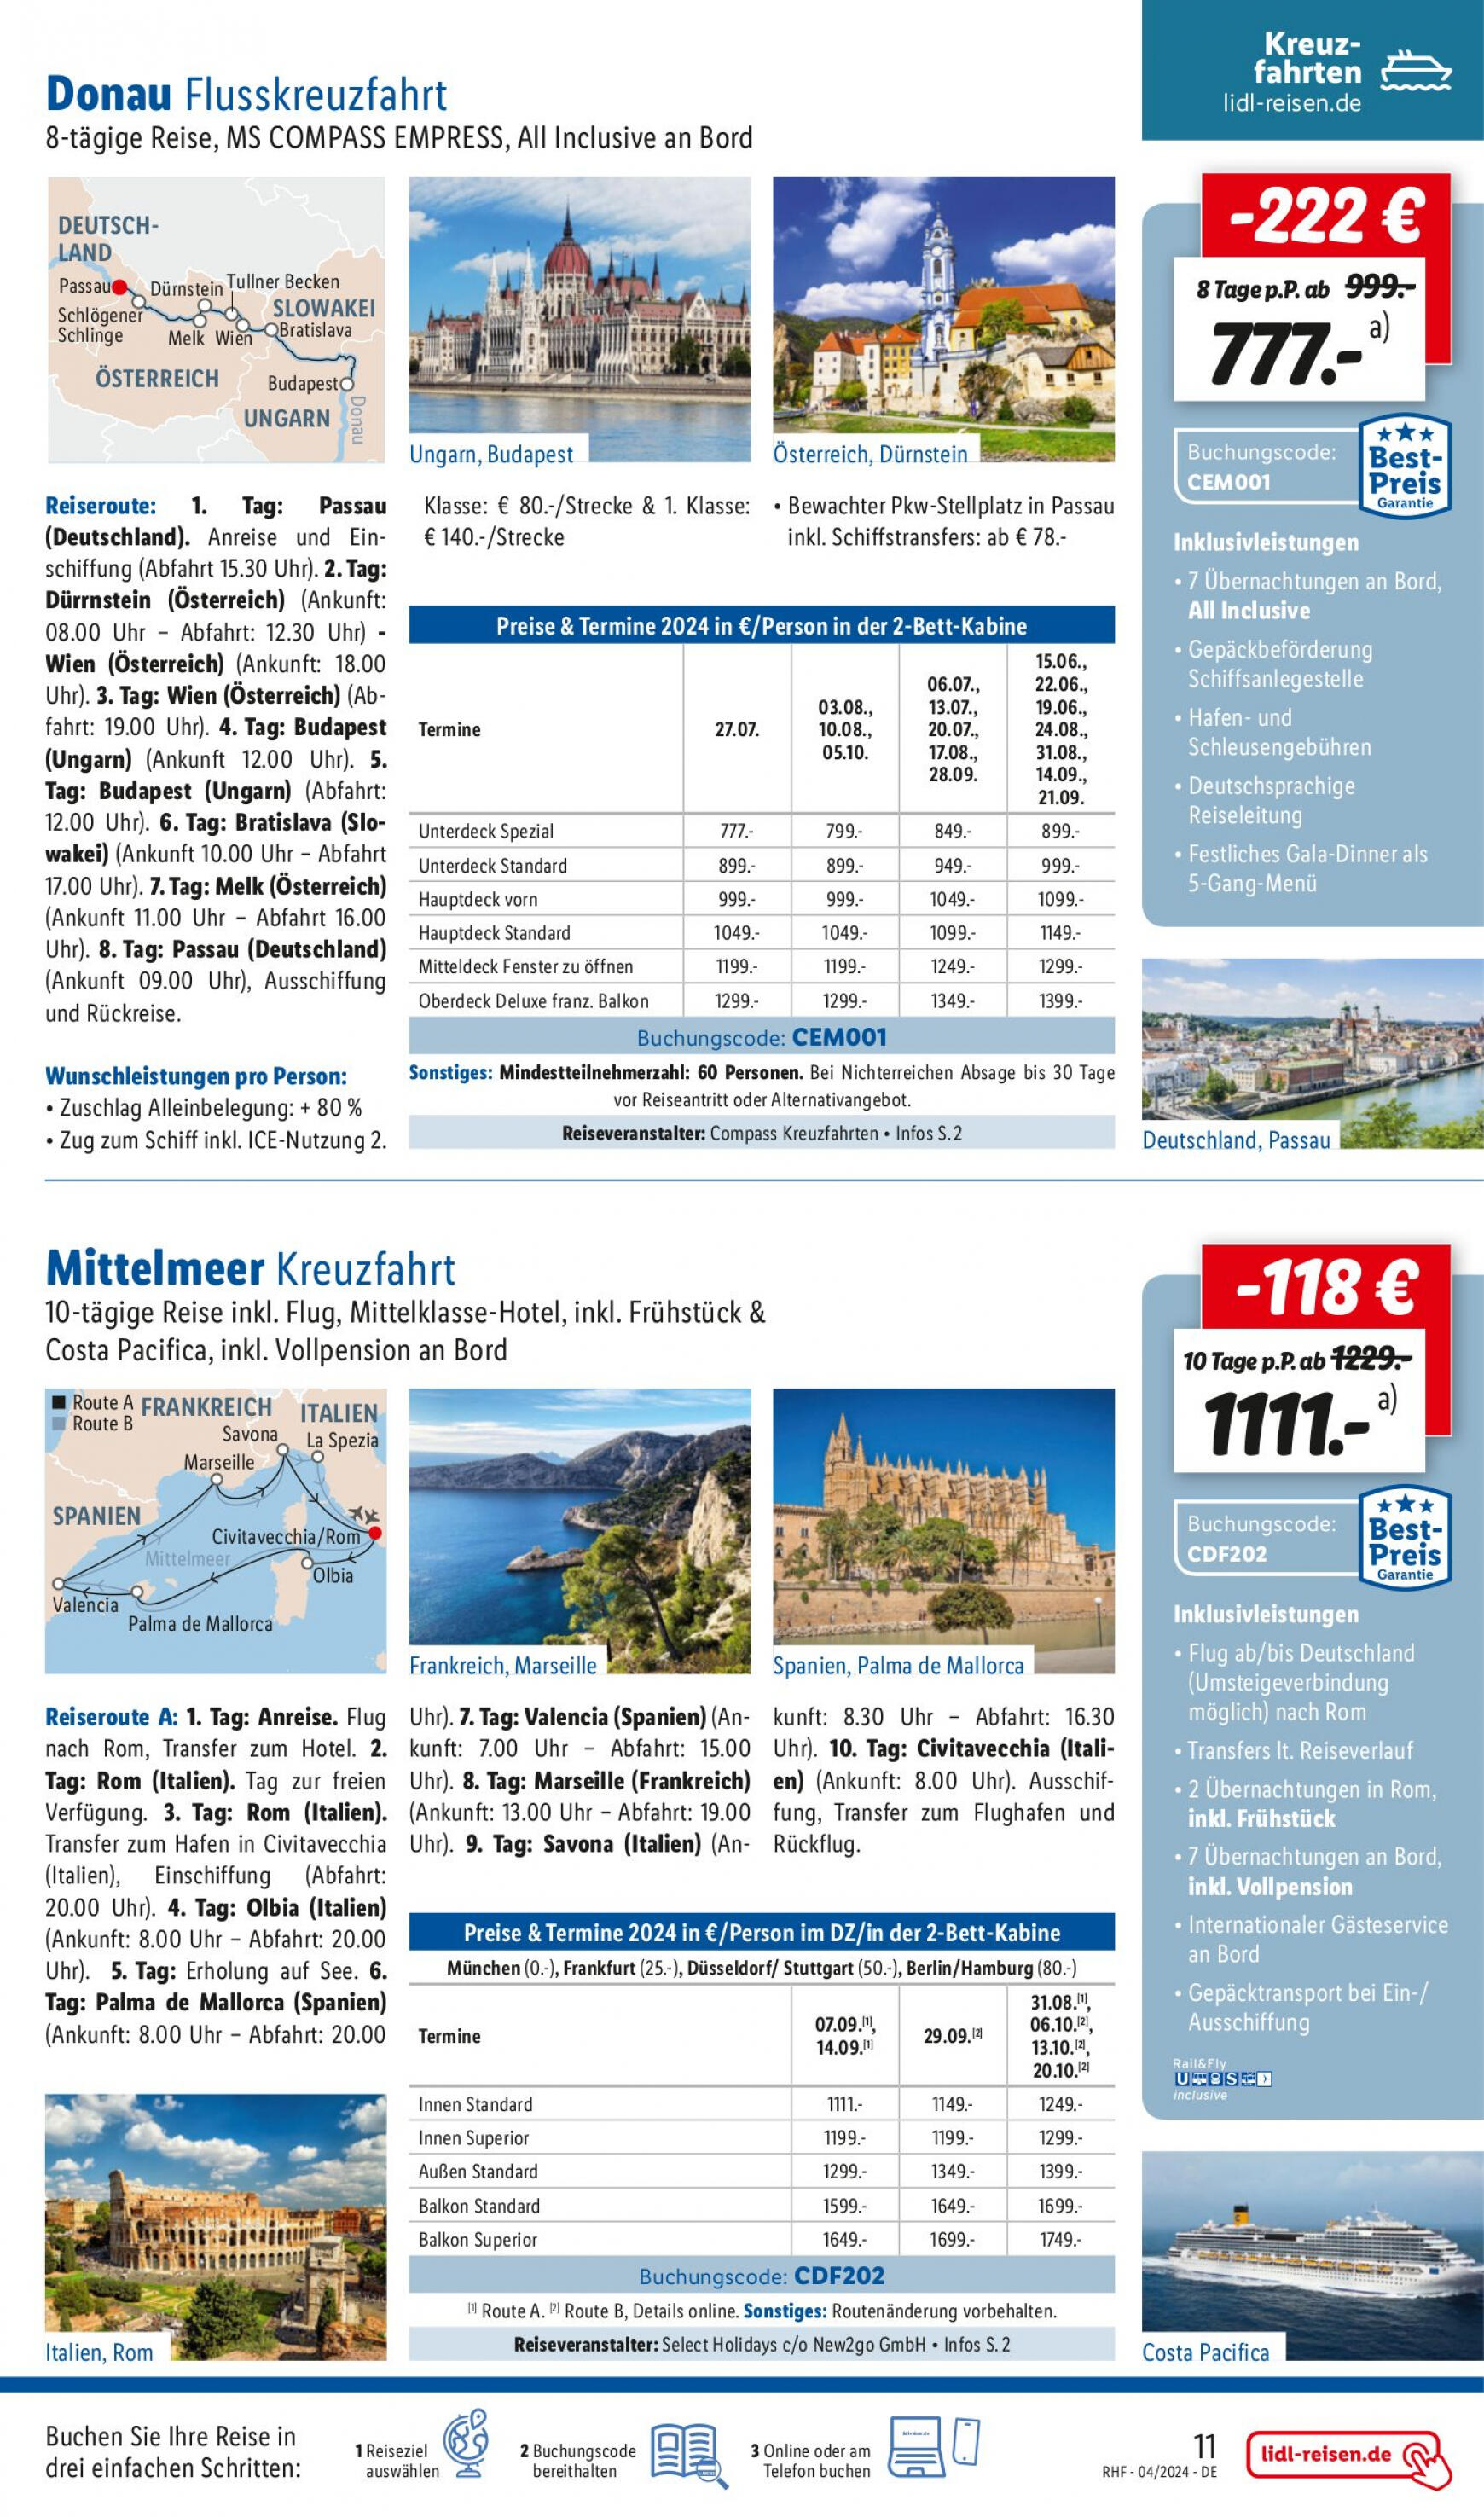 lidl - Flyer Lidl - April Reise-Highlights aktuell 27.03. - 30.04. - page: 11